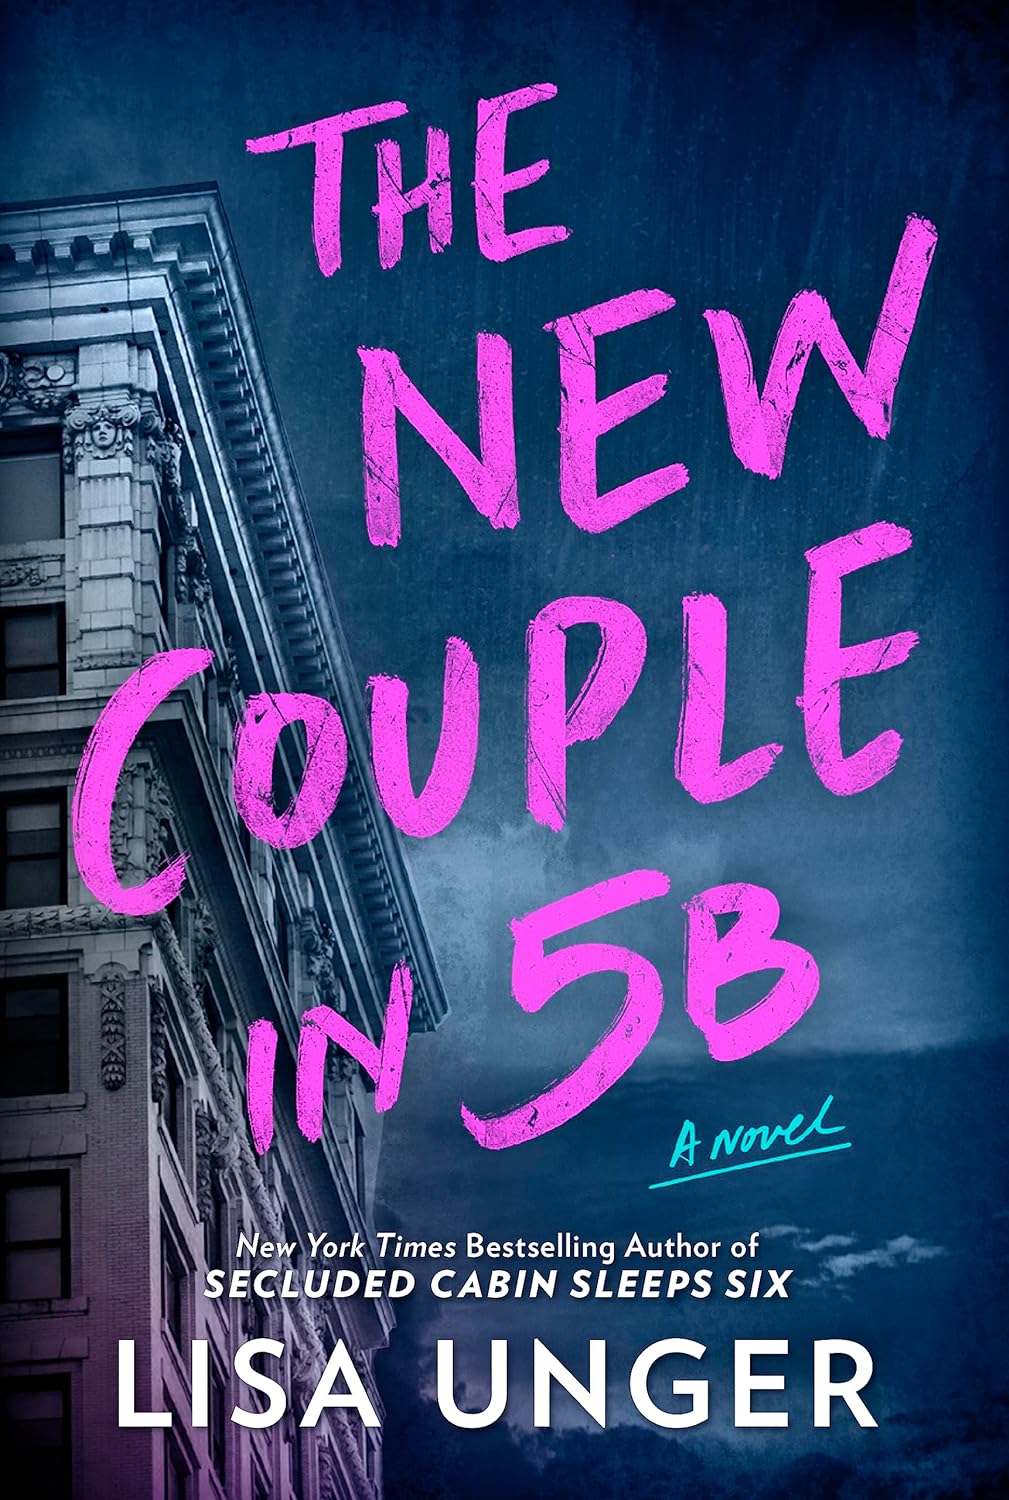 Image for "The New Couple in 5b"